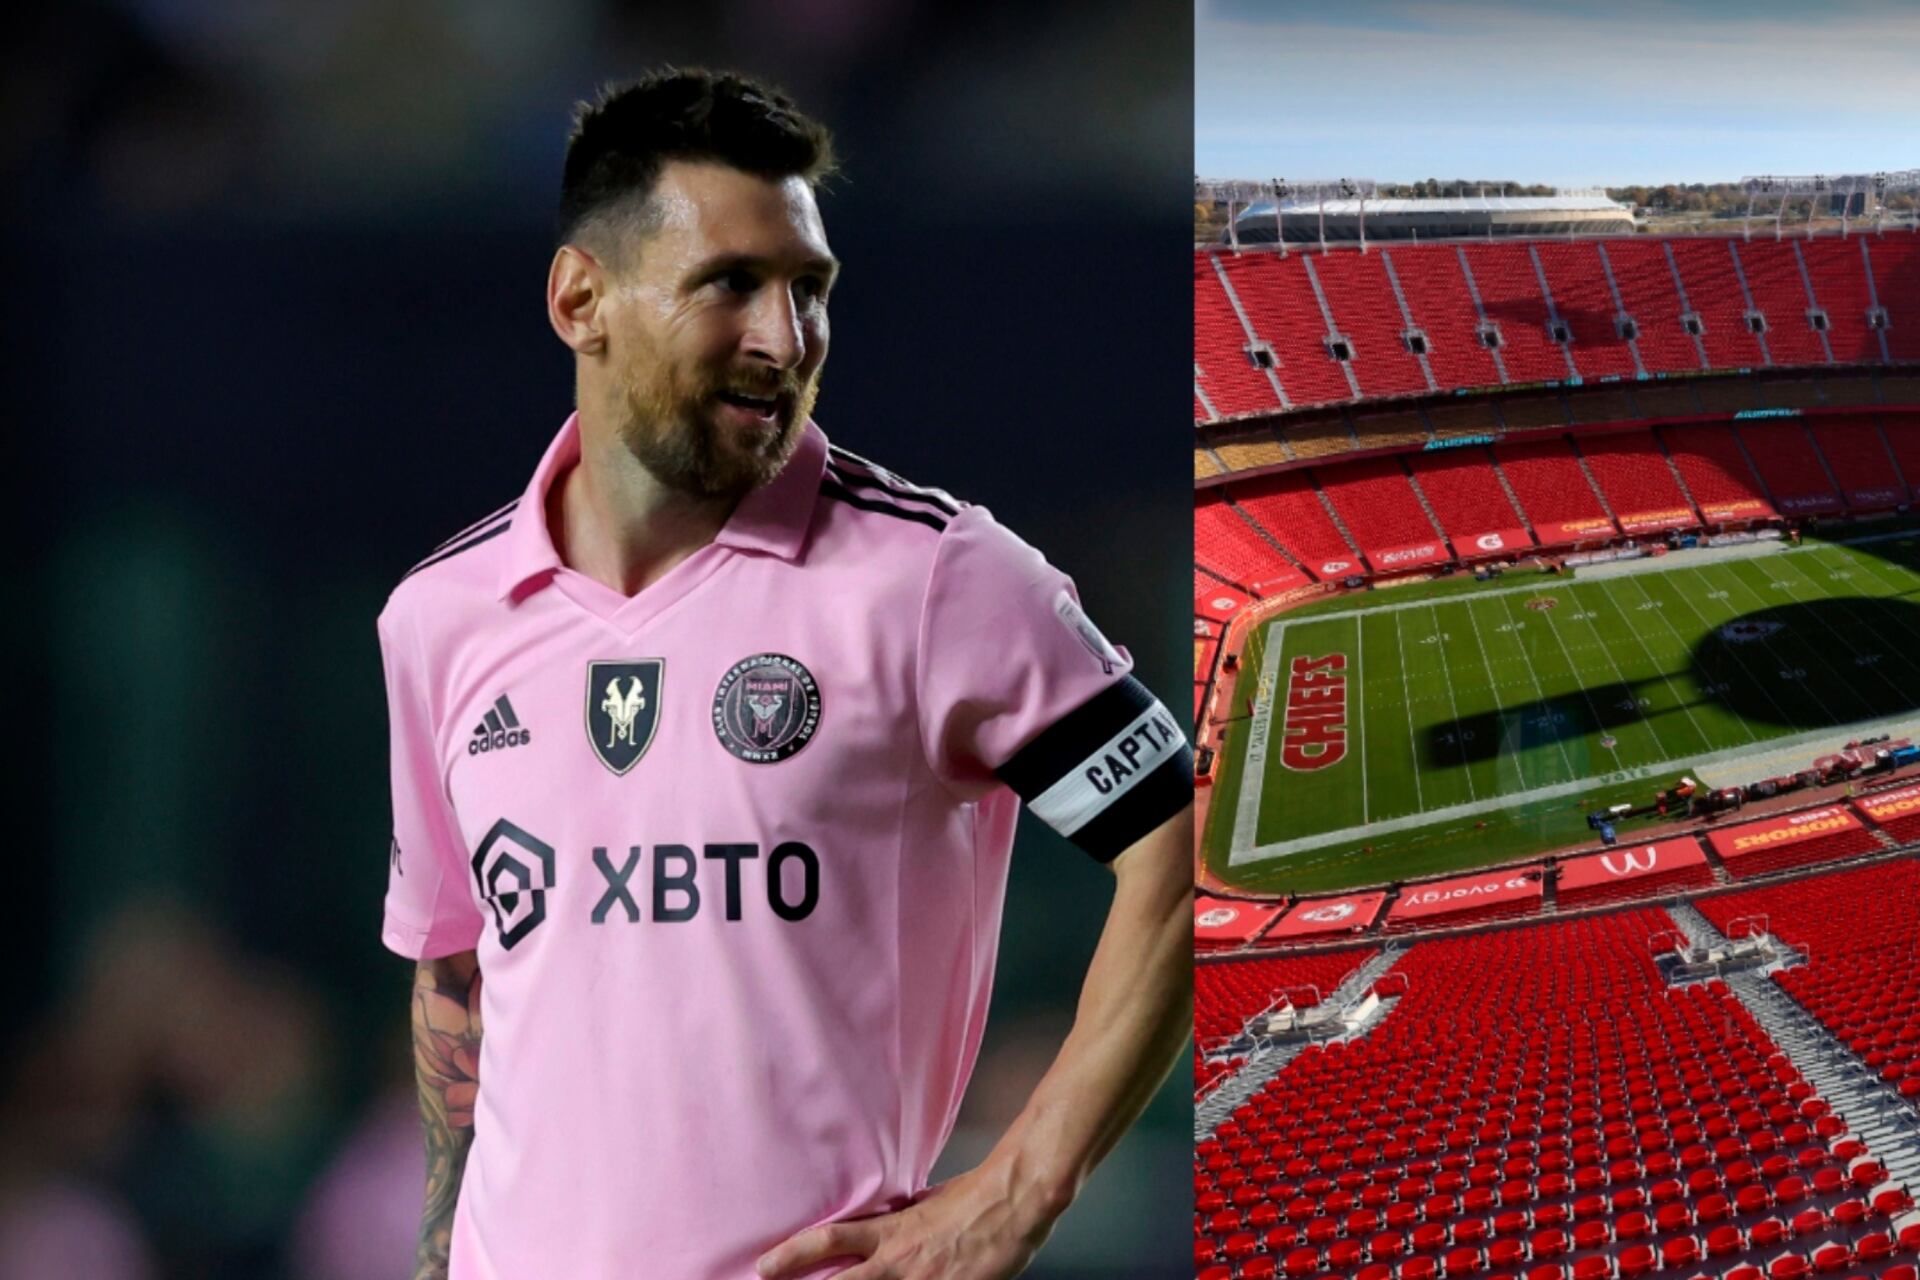 How much will tickets cost at Kansas Cirt, the incredible phenomenon of Lionel Messi in Major League Soccer